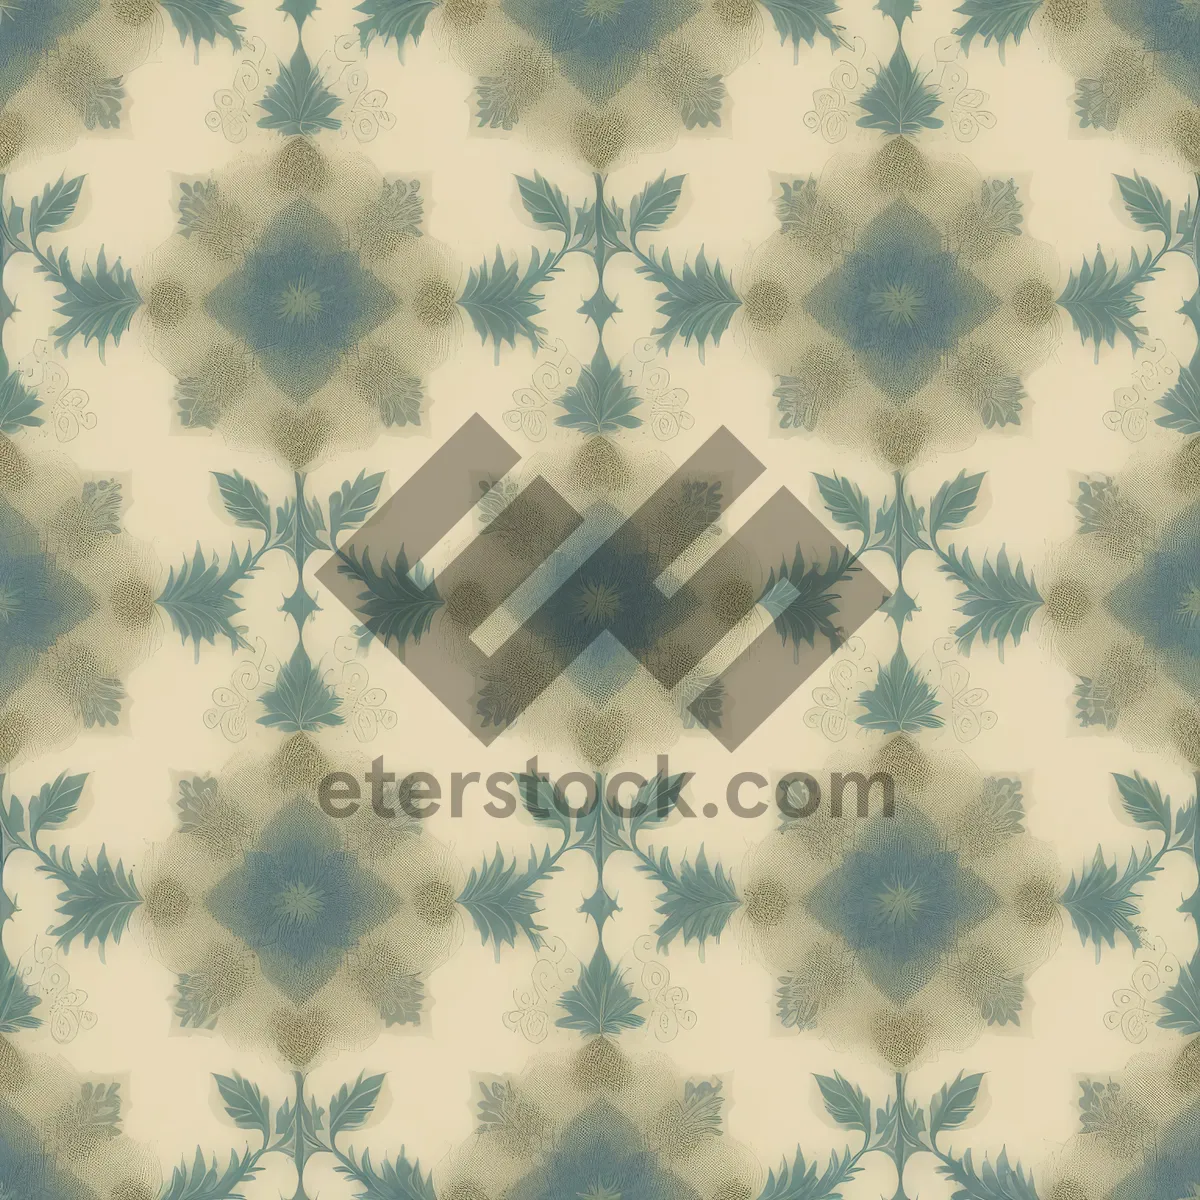 Picture of Floral silk vintage wallpaper with intricate patterns.